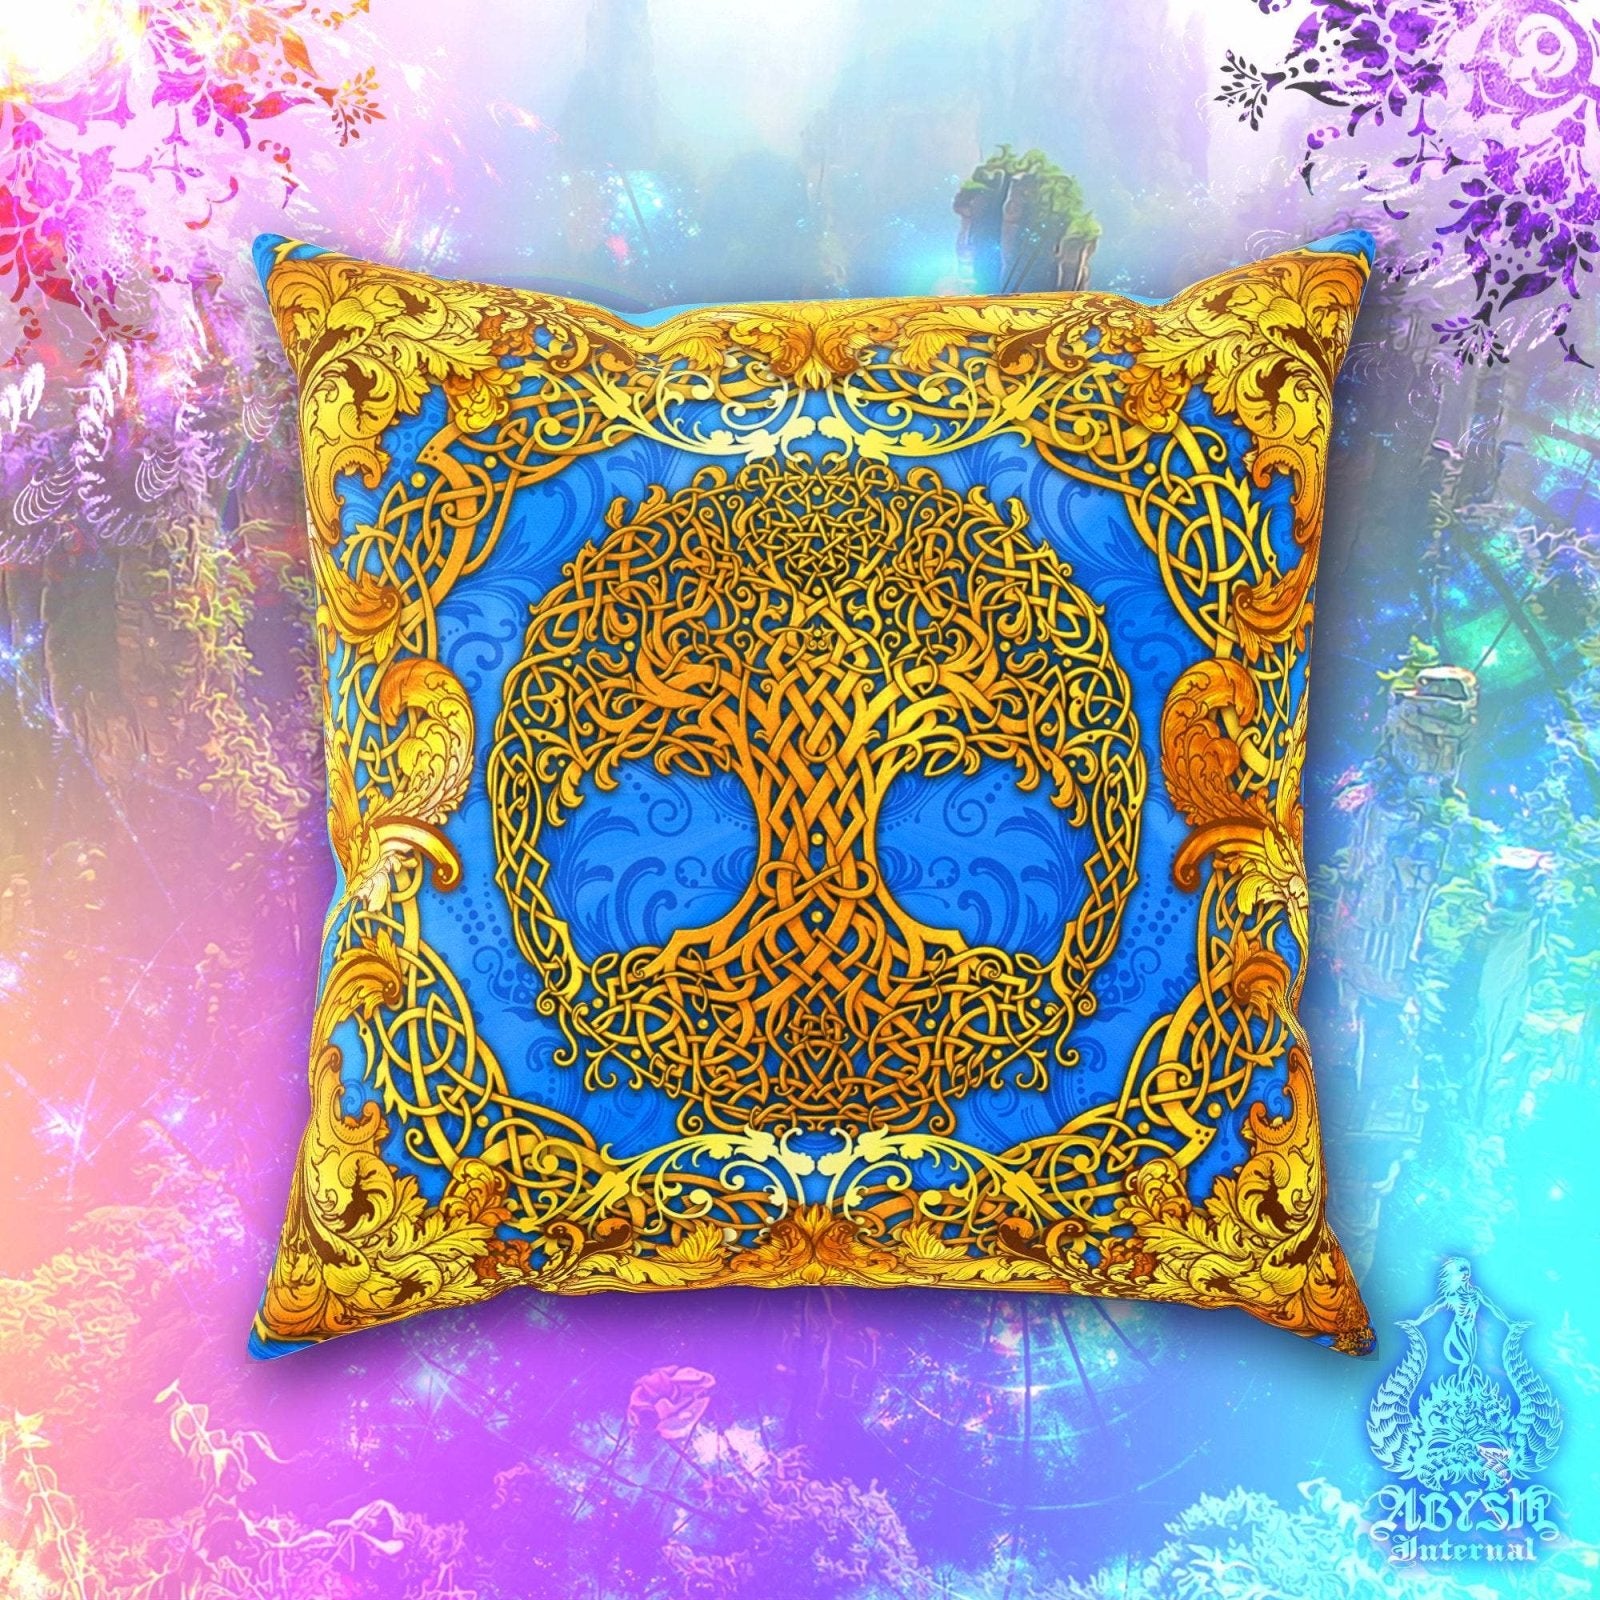 Celtic Throw Pillow, Decorative Accent Cushion, Tree of Life, Pagan Room Decor, Witchy Art, Funky and Eclectic Home - Cyan & Gold - Abysm Internal